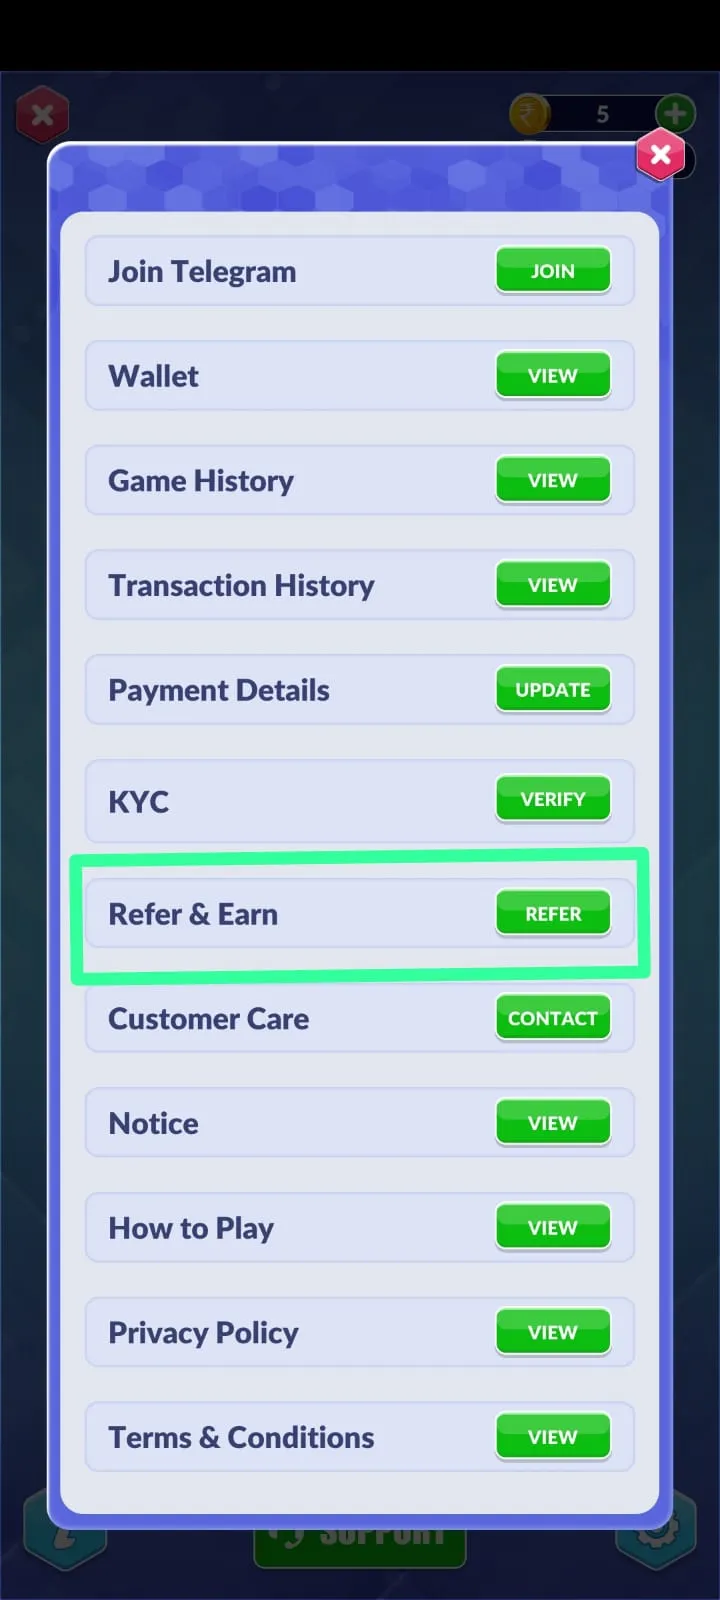 refer and earn option